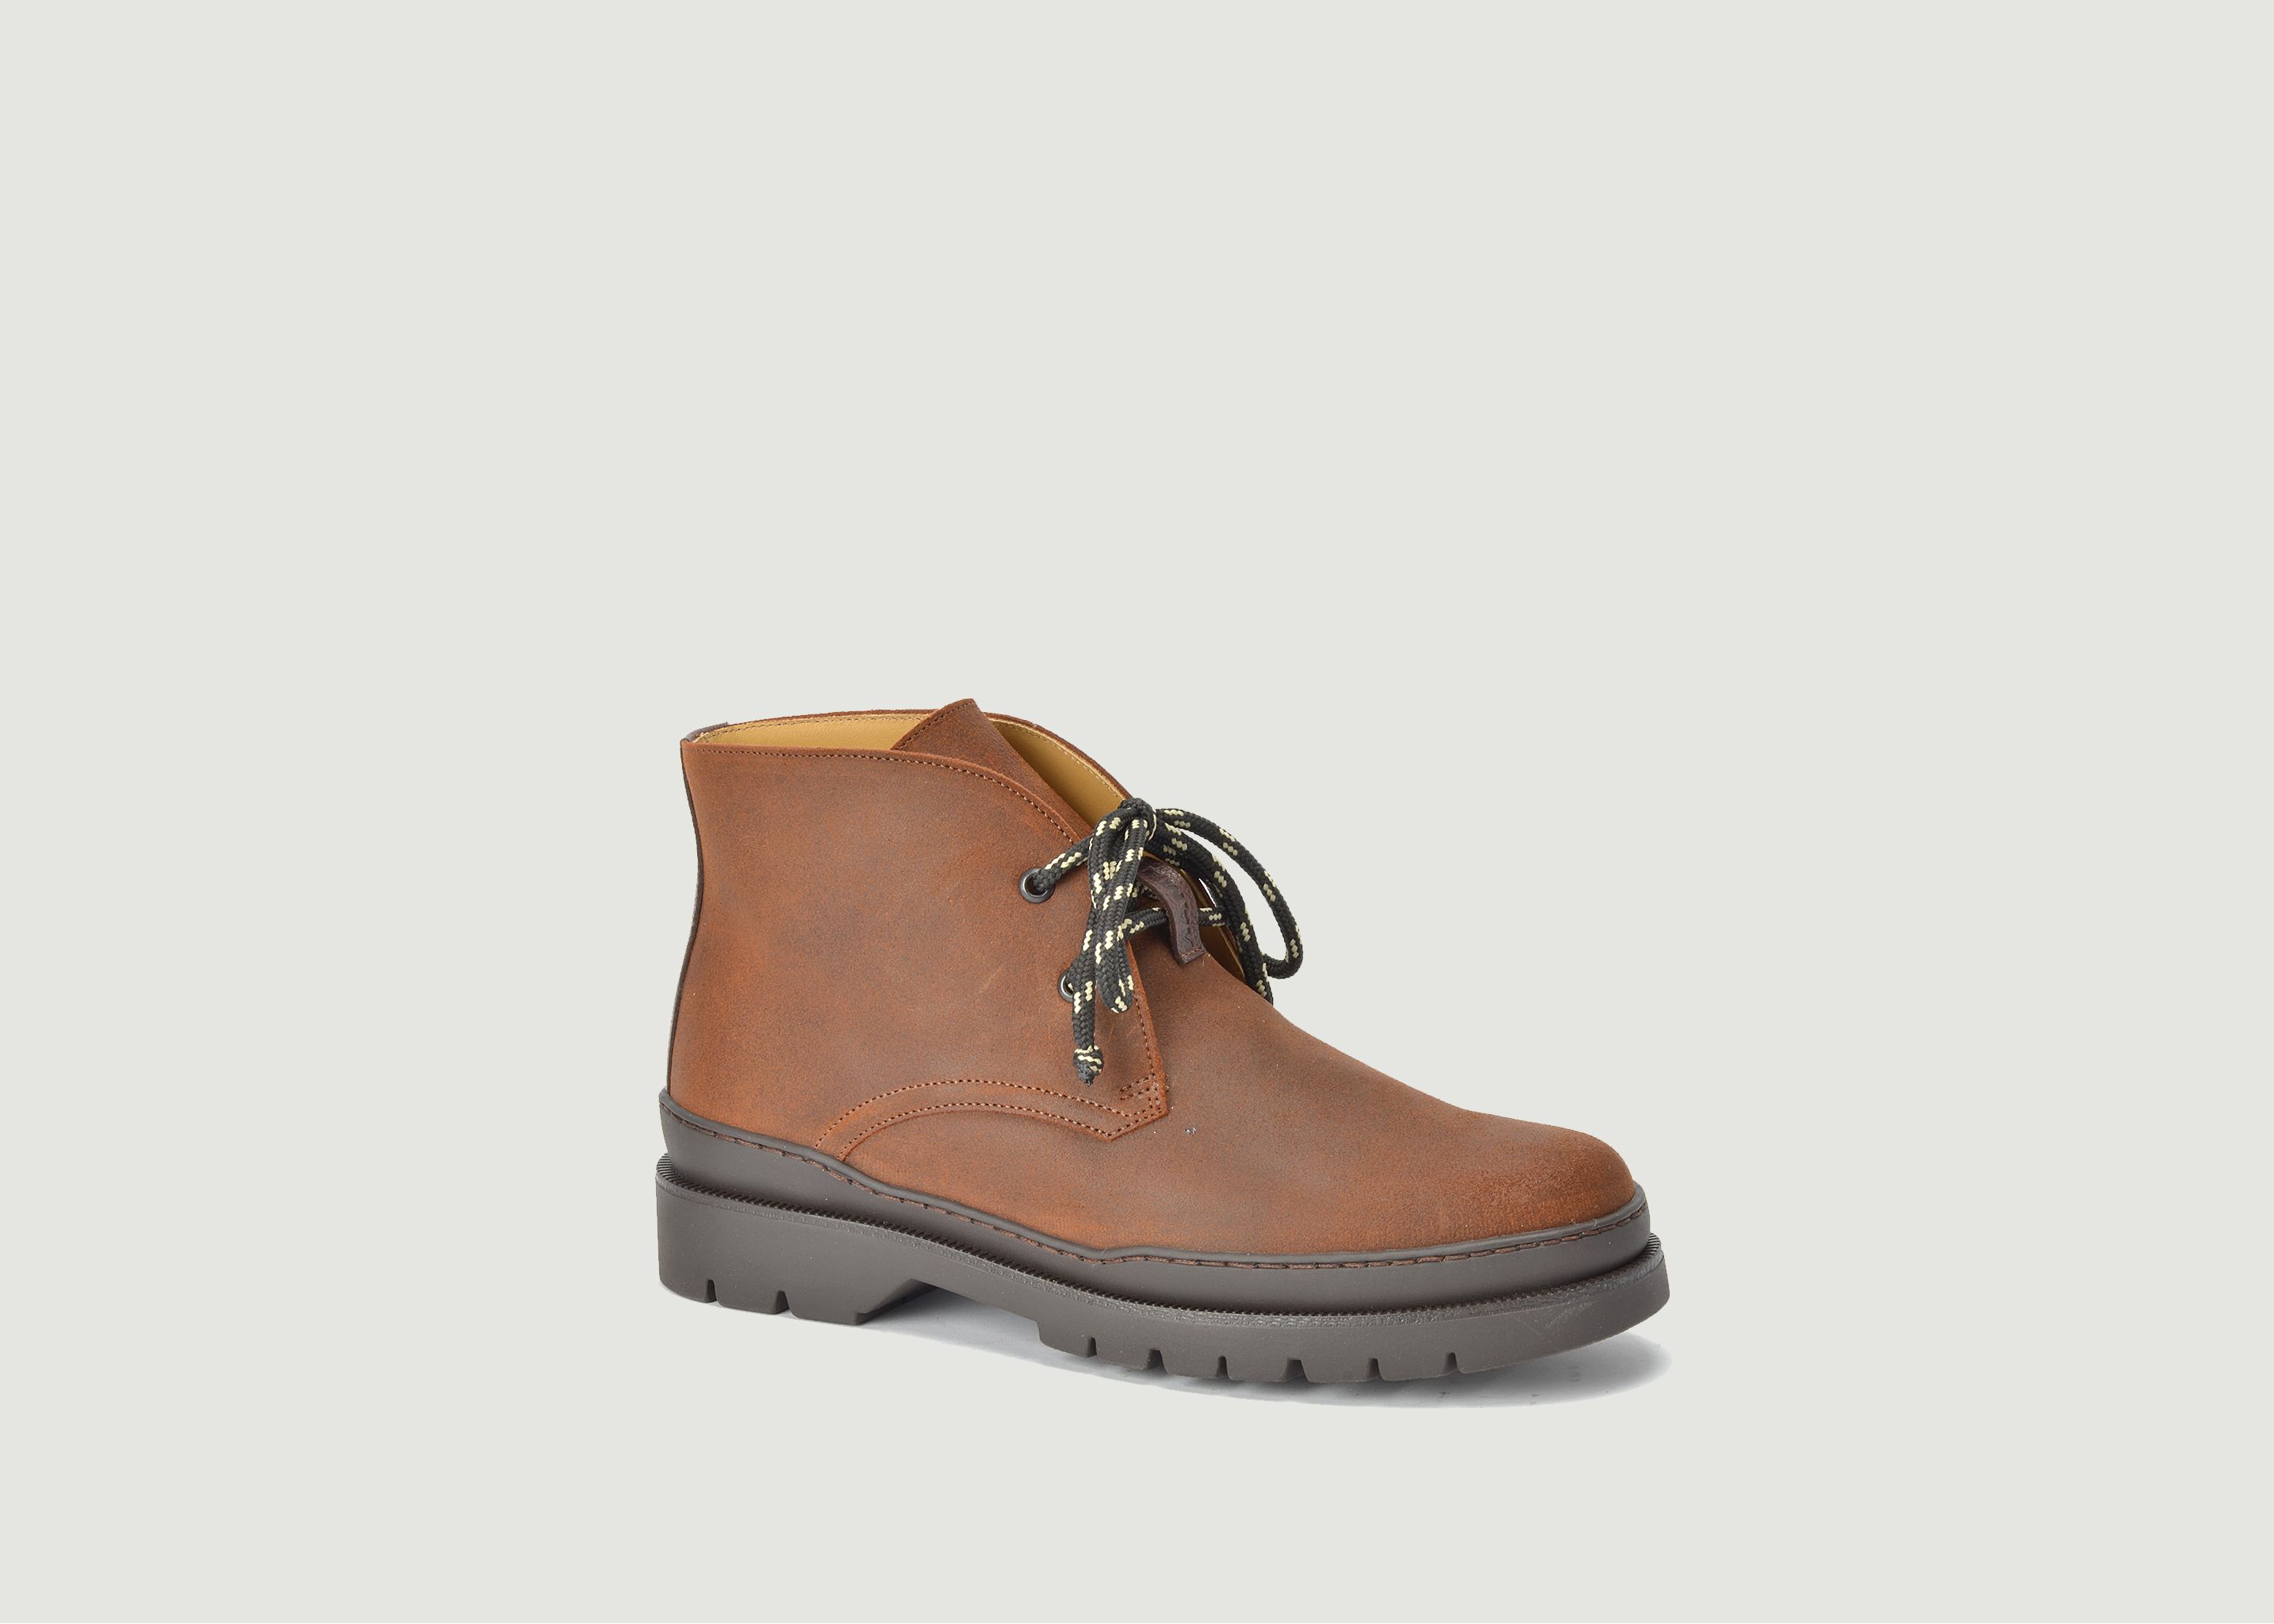 Cagna leather boots  - Kleman